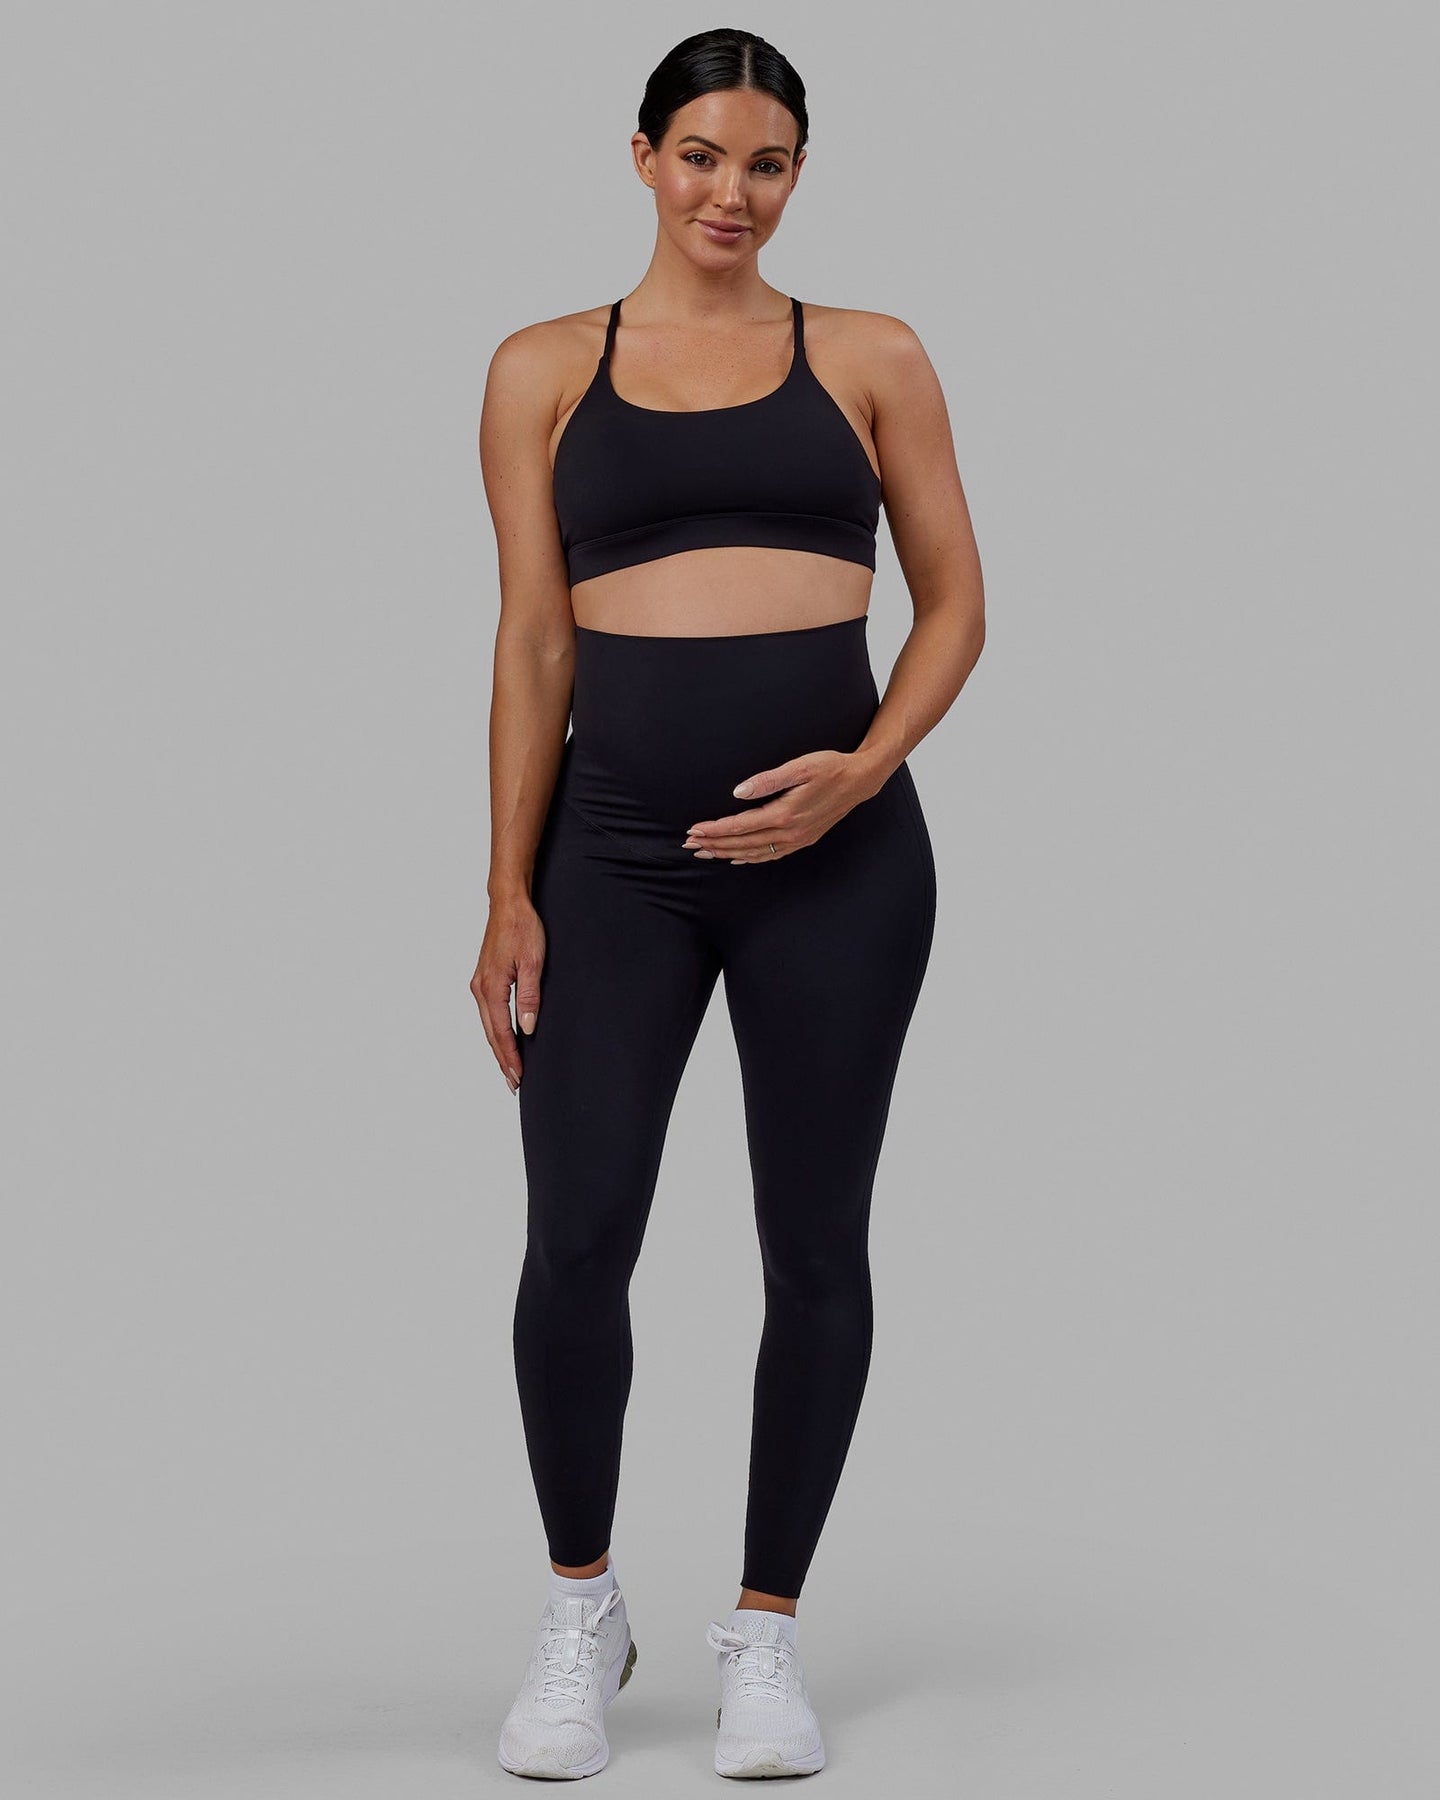 Cache Coeur Maternity Sports Leggings Woma - Black - Recycled Fibres! woman